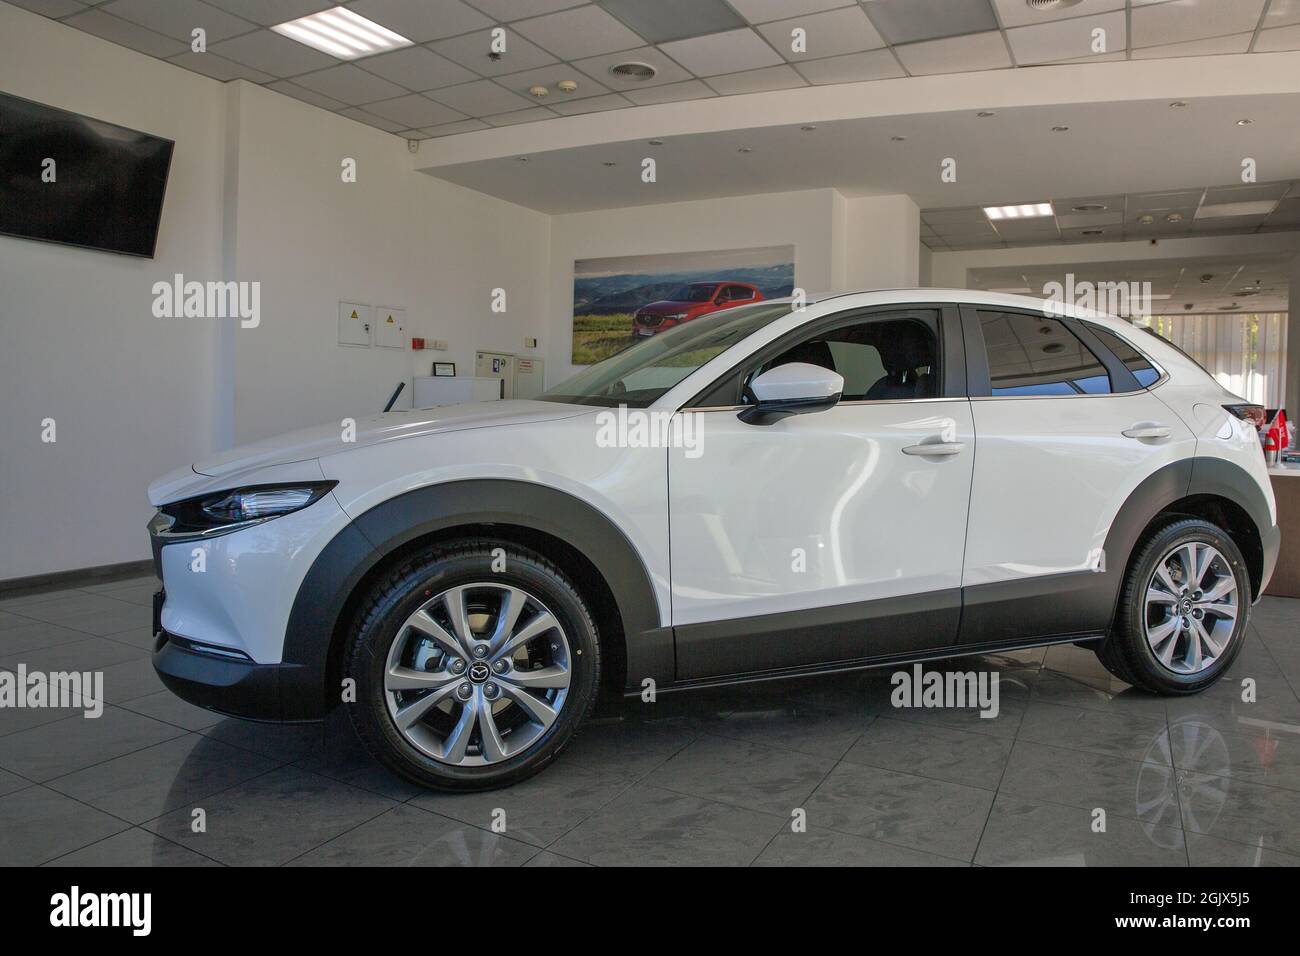 KYIV, UKRAINE - MAY 10, 2021: New white Mazda CX-30 car on display in car dealership Auto International. Crossover SUV manufactured in Japan by Mazda Stock Photo